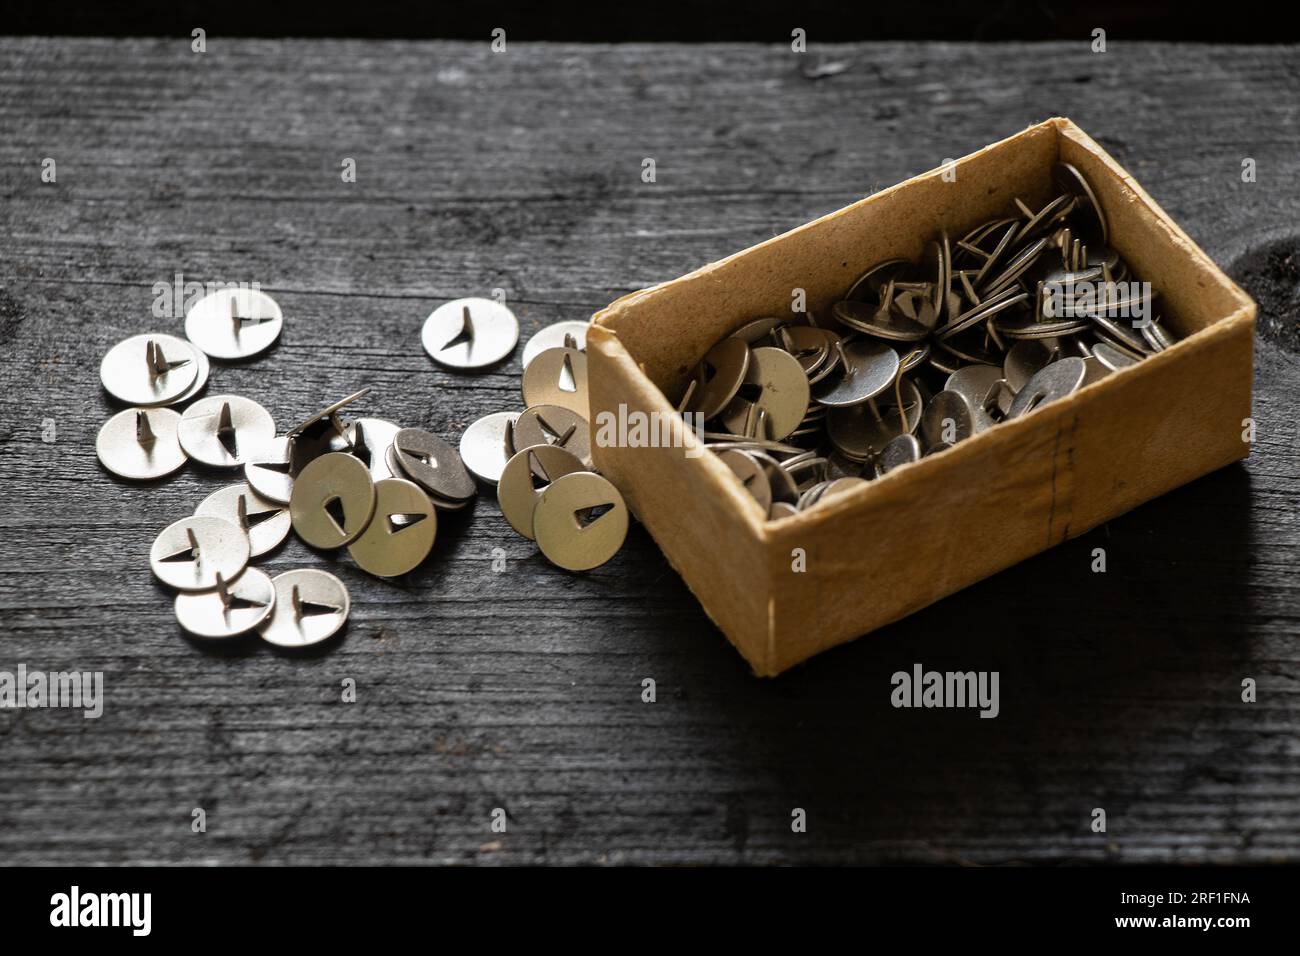 Old round metal paper clips lie on a black wooden table next to it a paper box with paper clips, stationery Stock Photo